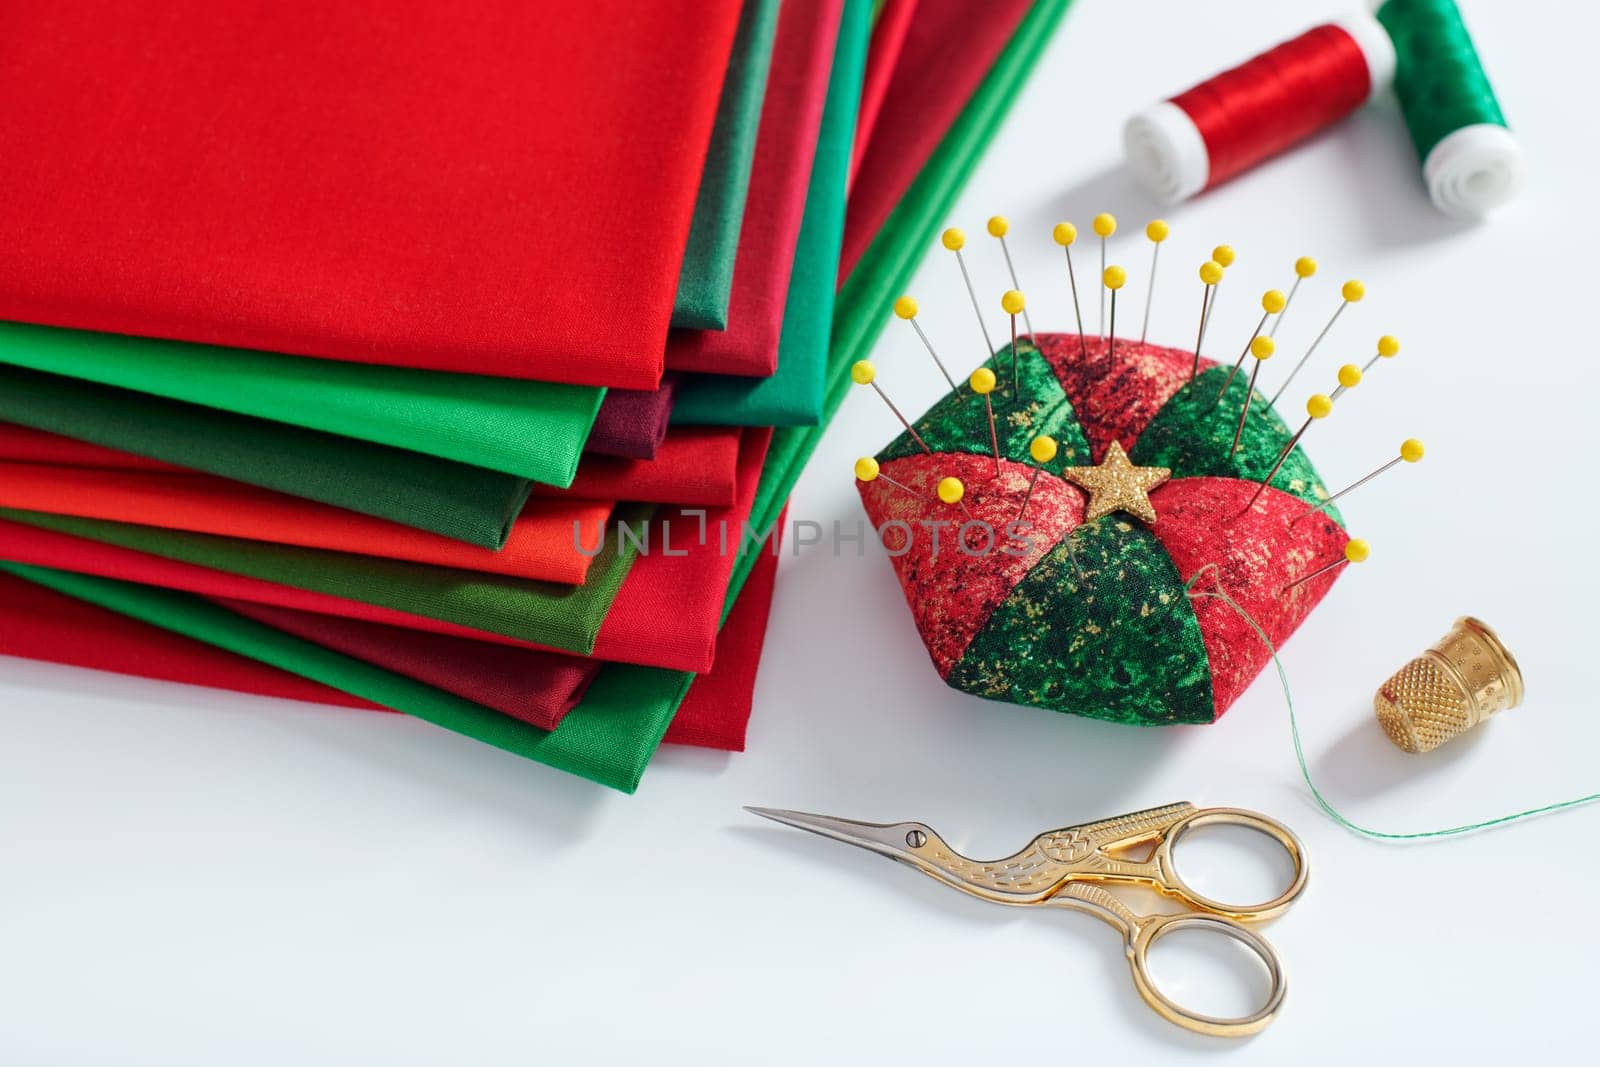 Pile of red and green fabrics, pincushion, scissors, thimble and spools of thread on white background